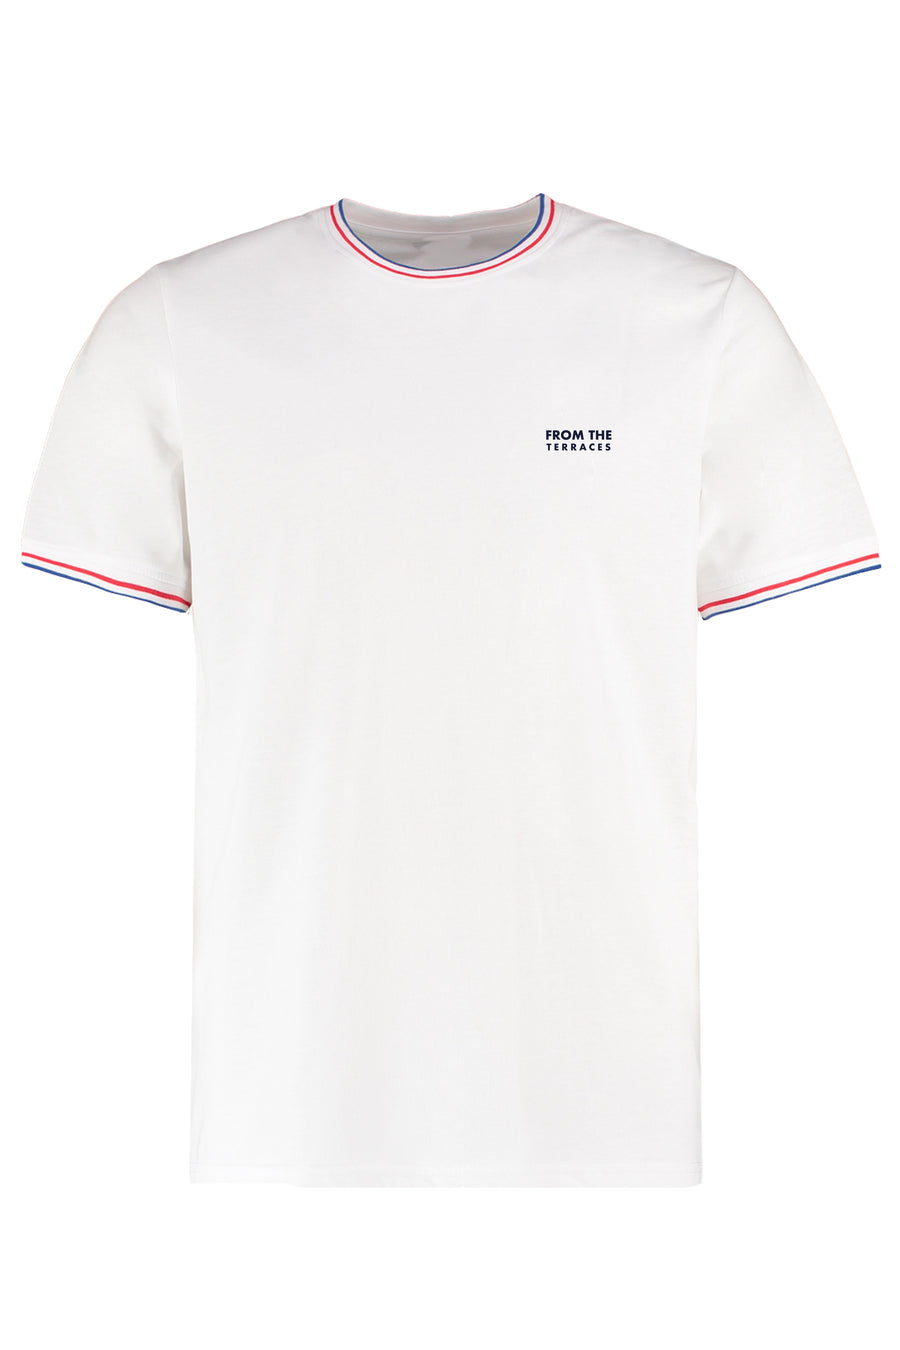 Tifoso Tipped Tee White with Red and Blue